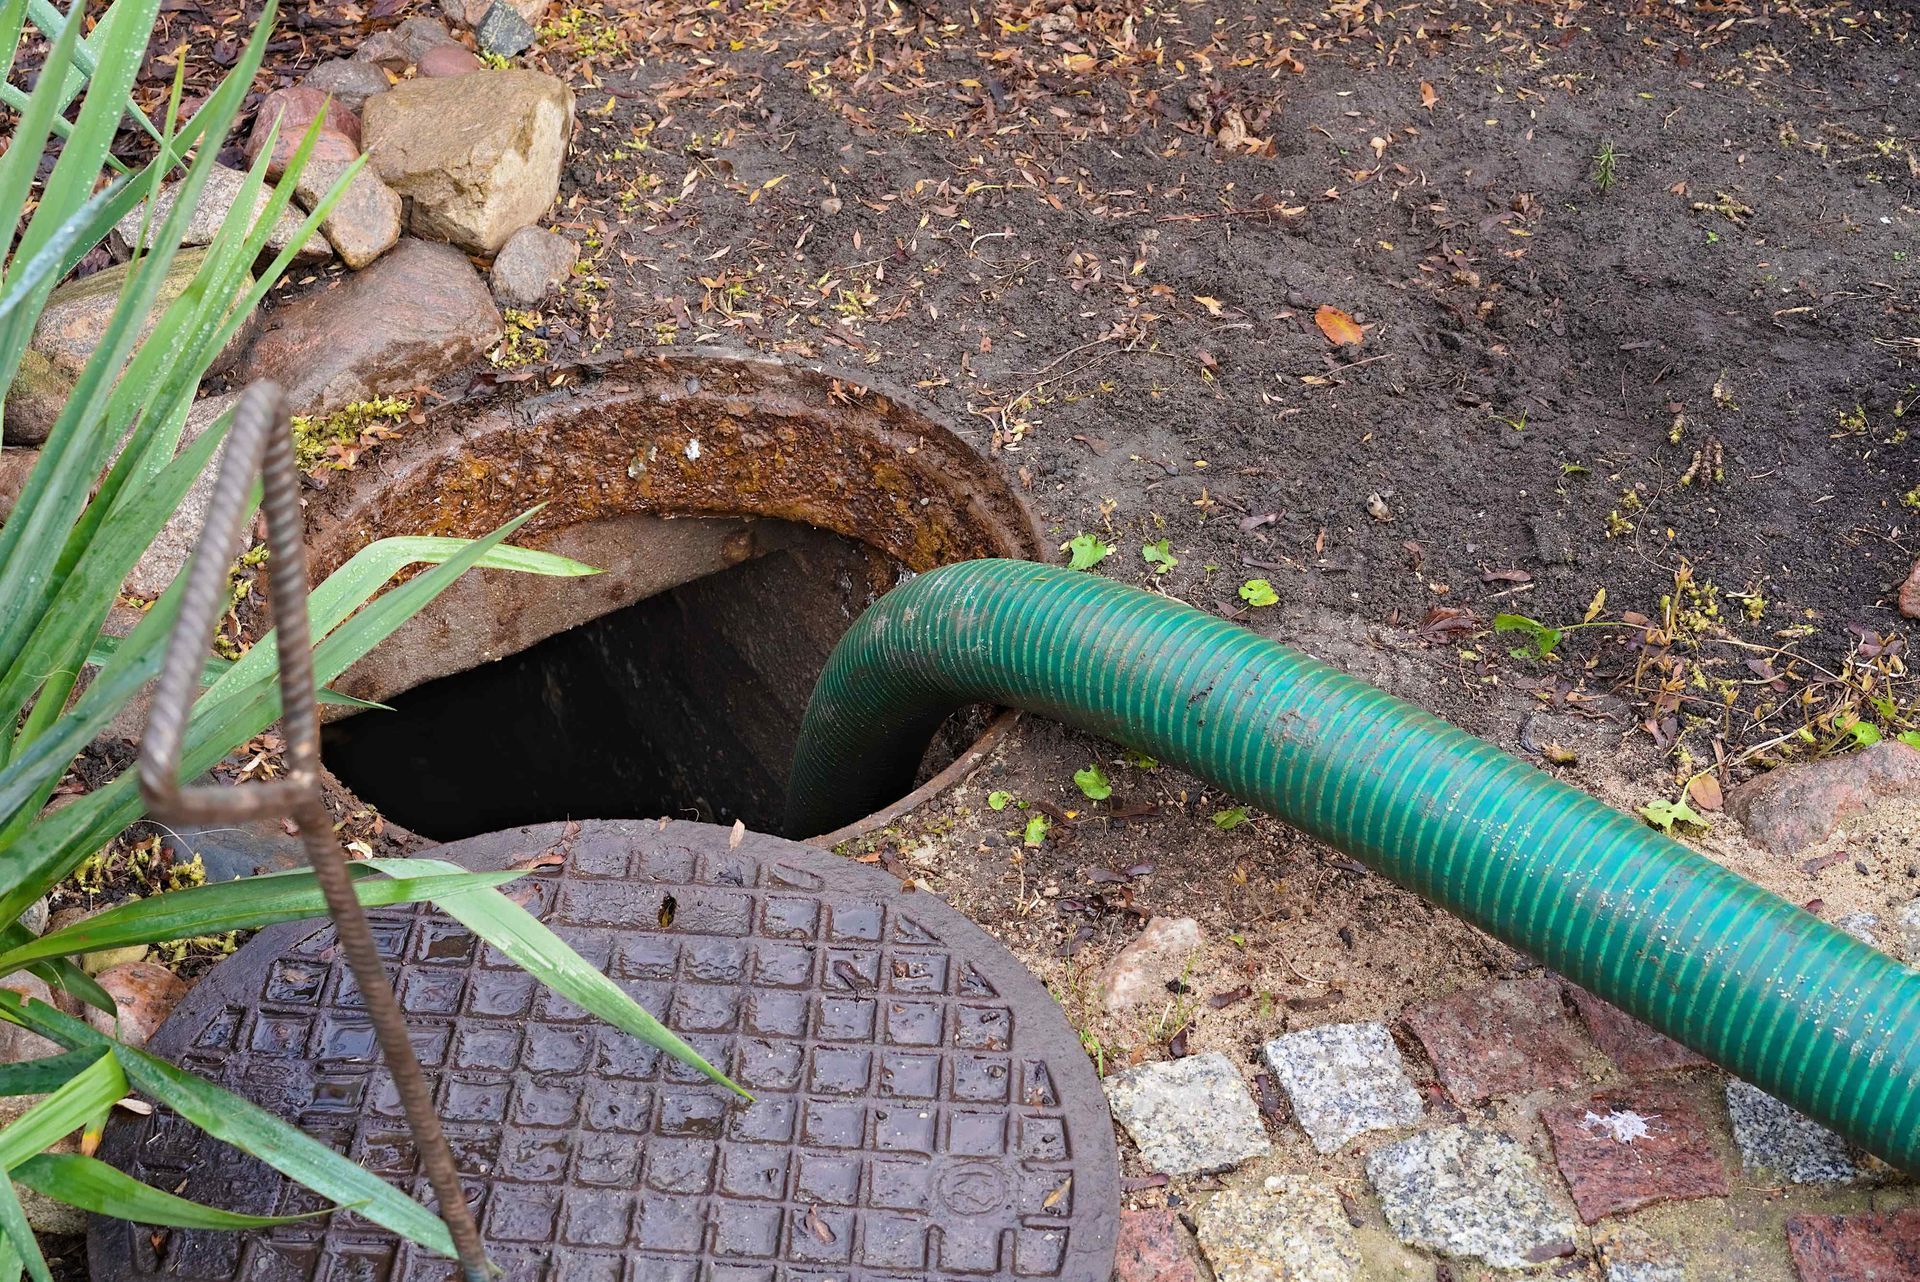 Completion of regular septic tank draining service